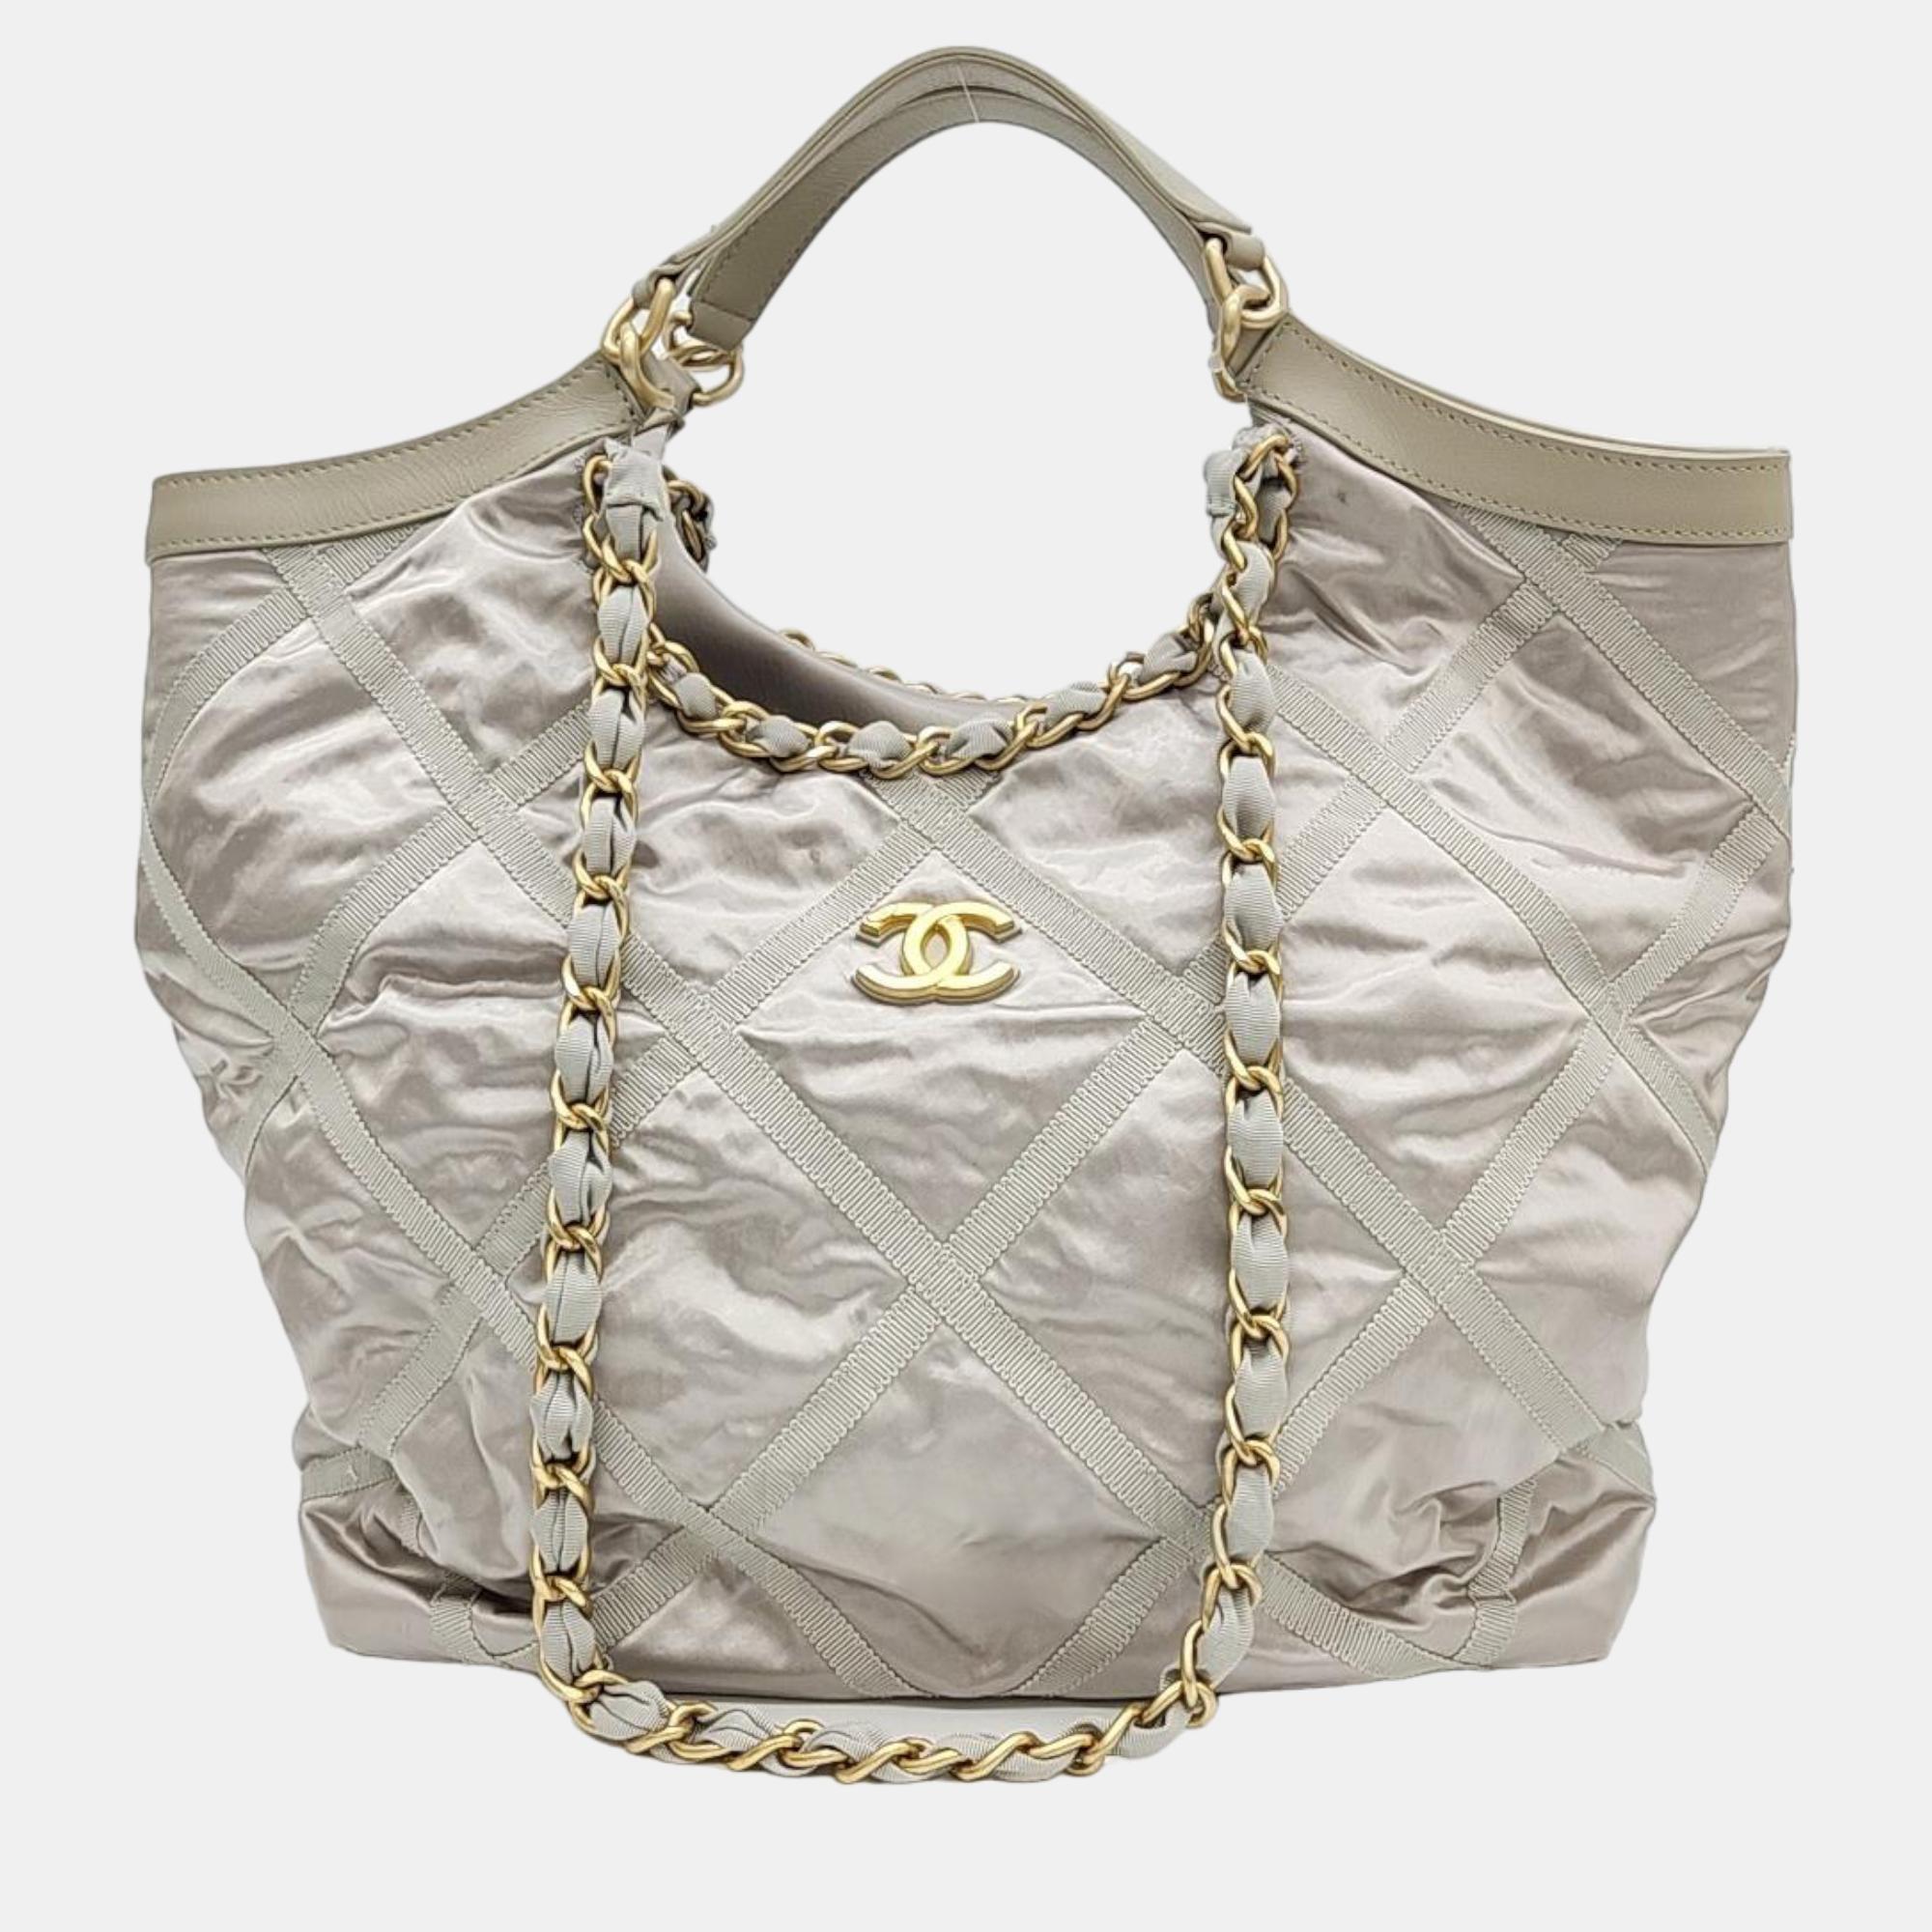 Chanel Beige Leather Maxi Shopping Bag